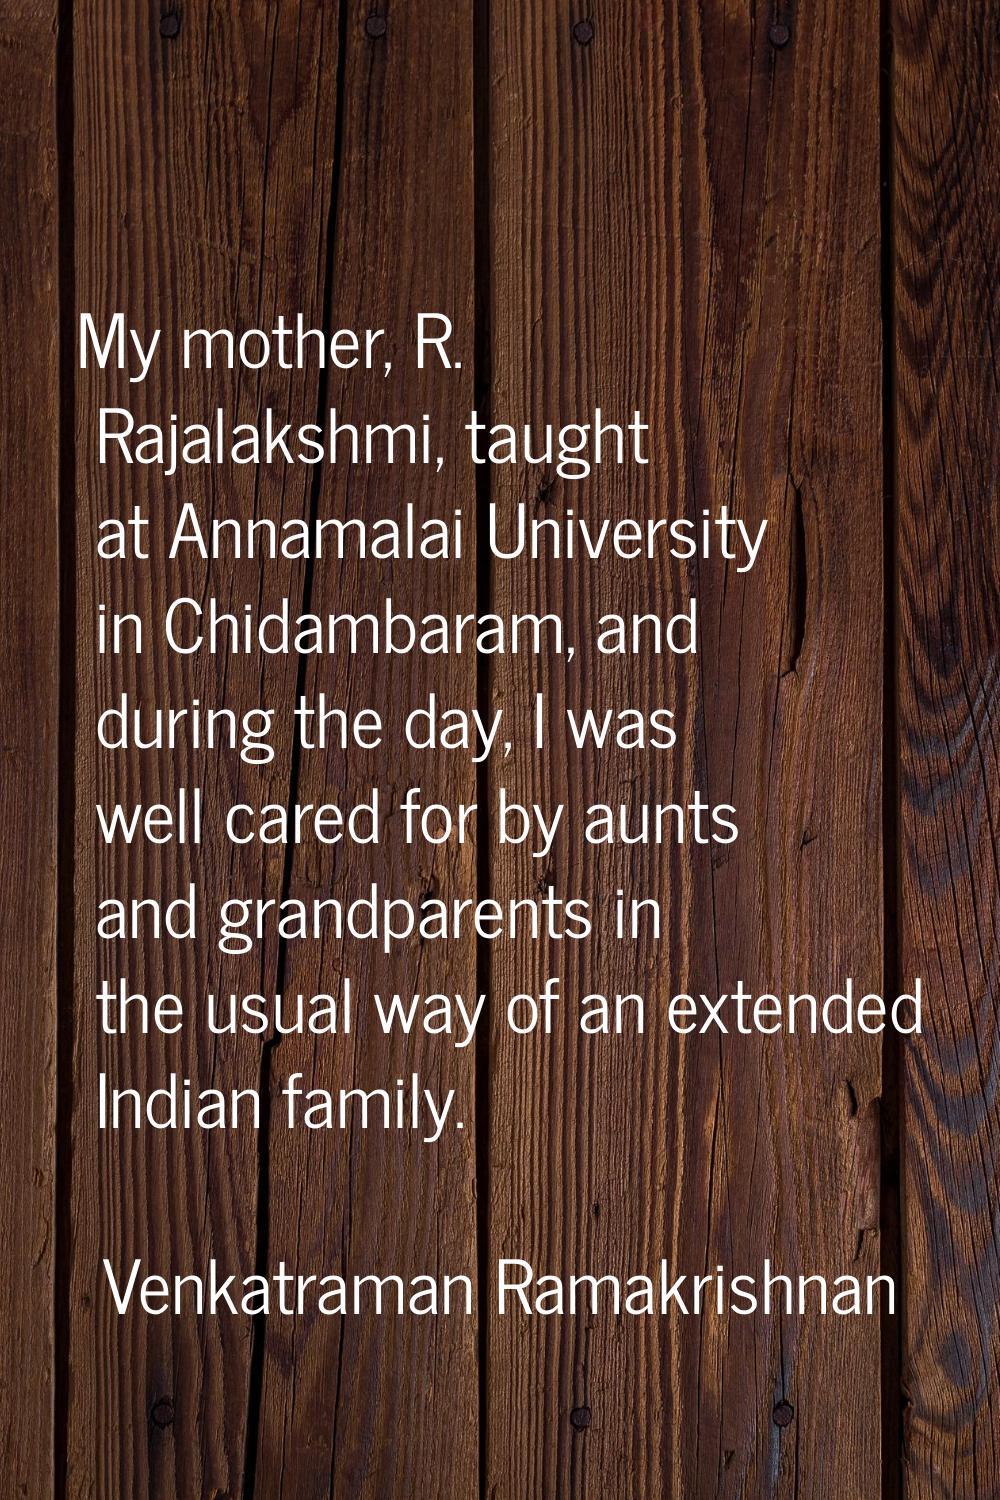 My mother, R. Rajalakshmi, taught at Annamalai University in Chidambaram, and during the day, I was